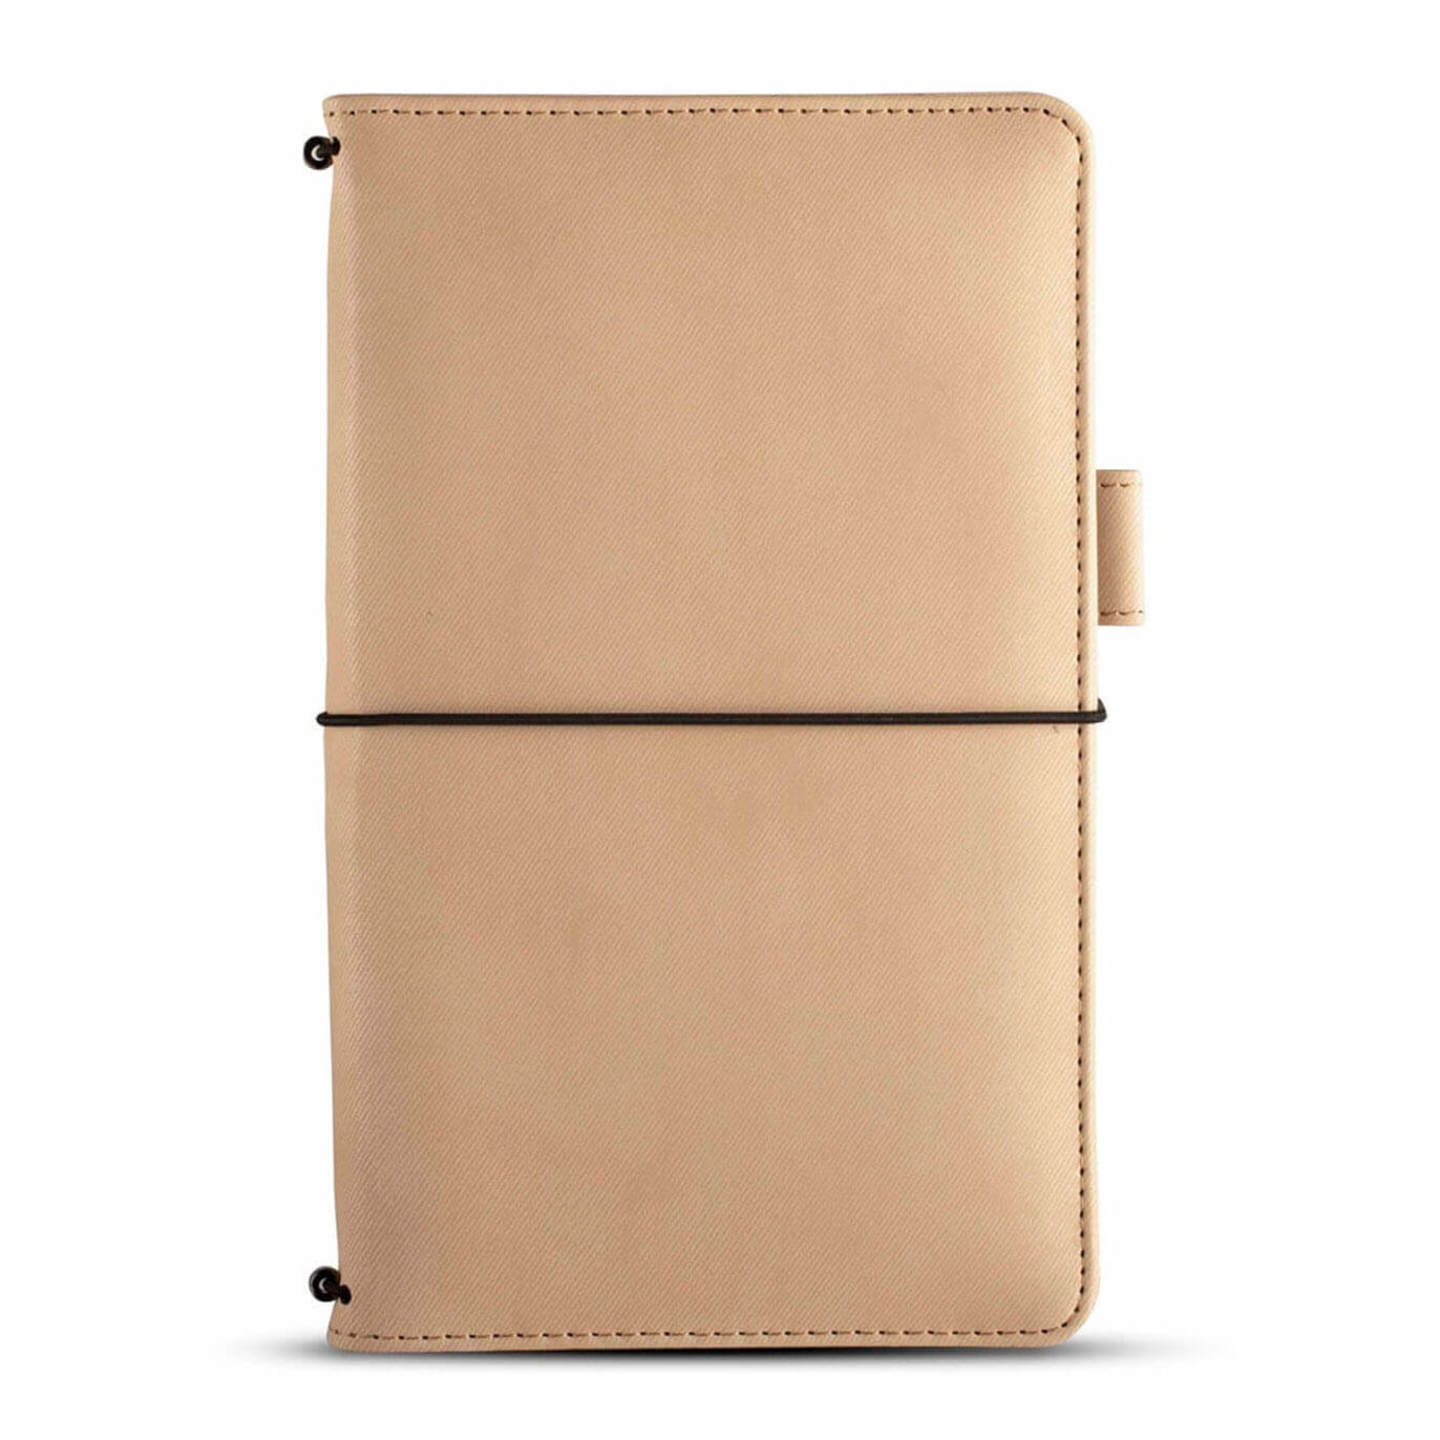 Journal Pennline Quikrite ChrG Two Tone Brushed Twill Sand 4000mAh